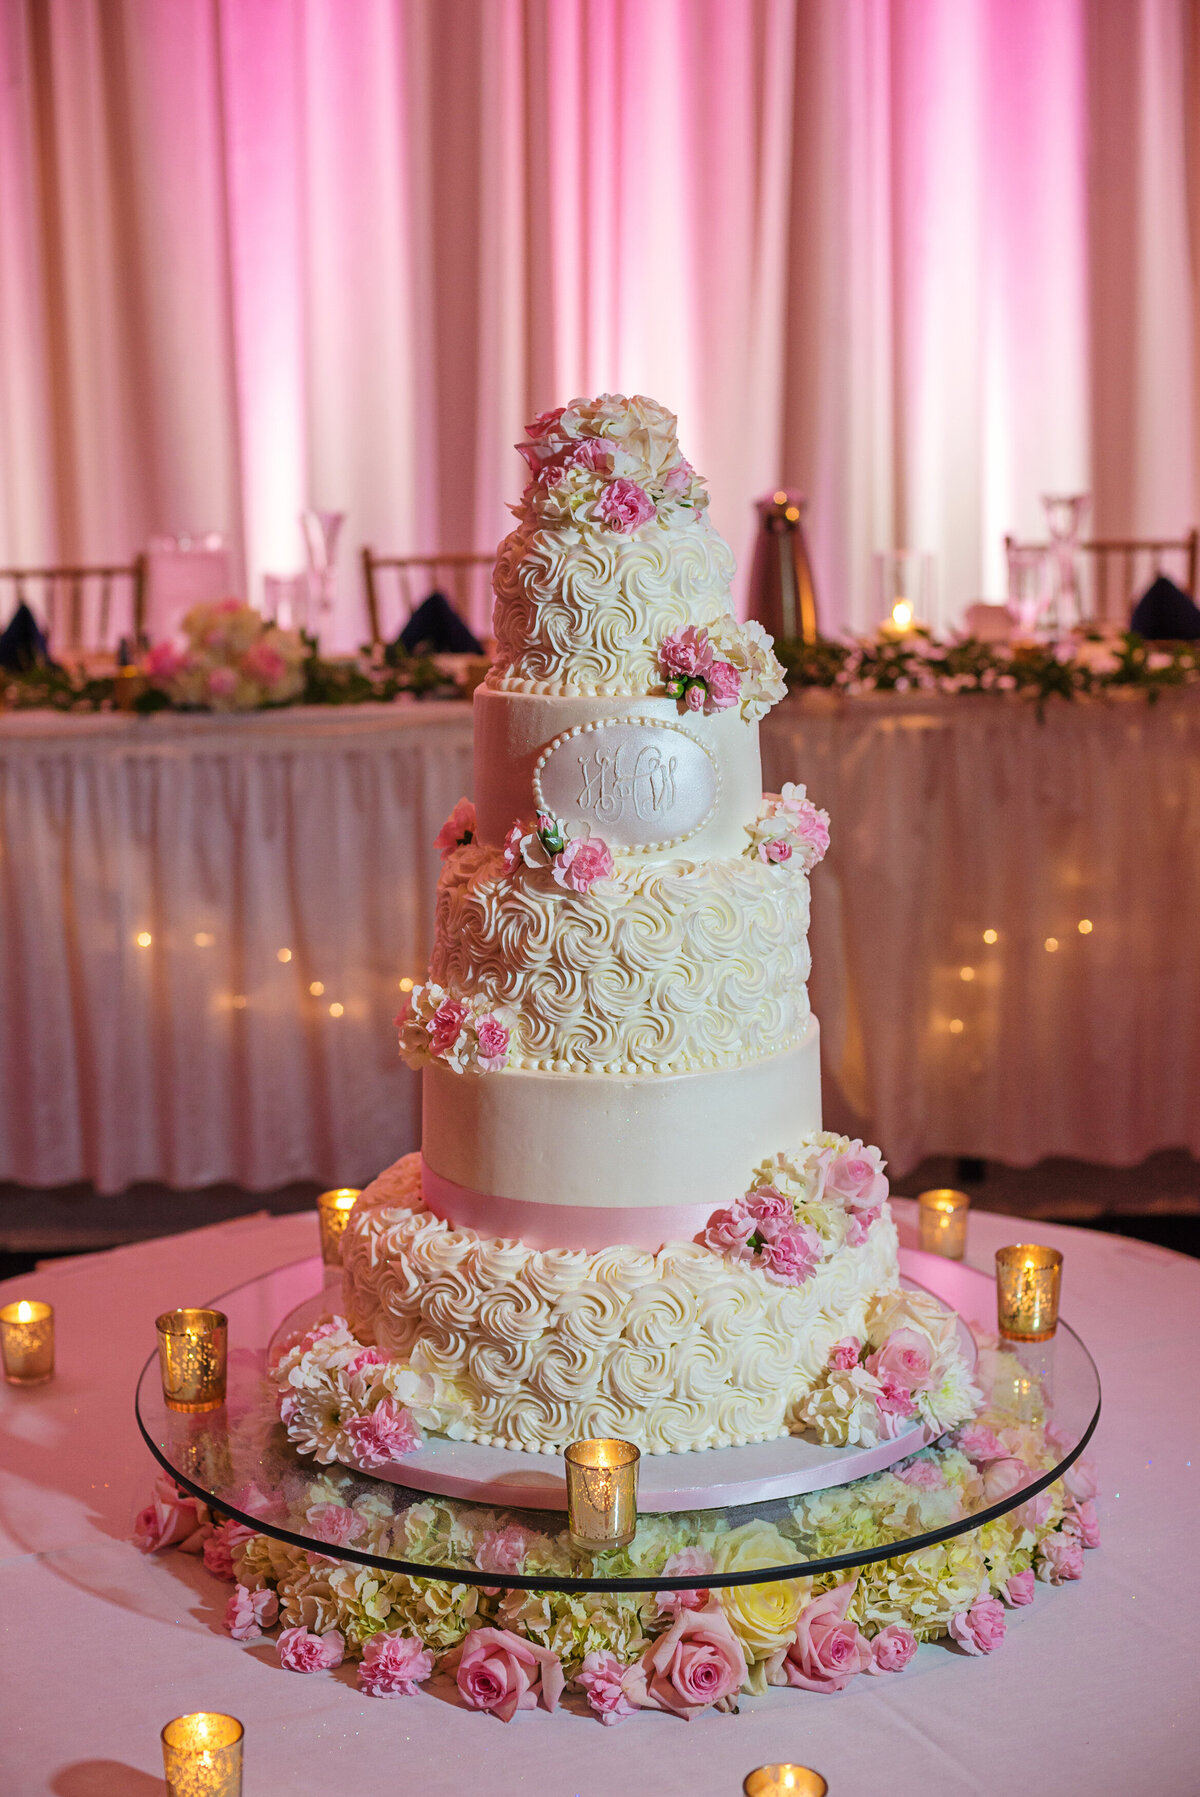 Wedding cake with pink flowers and white frosting.